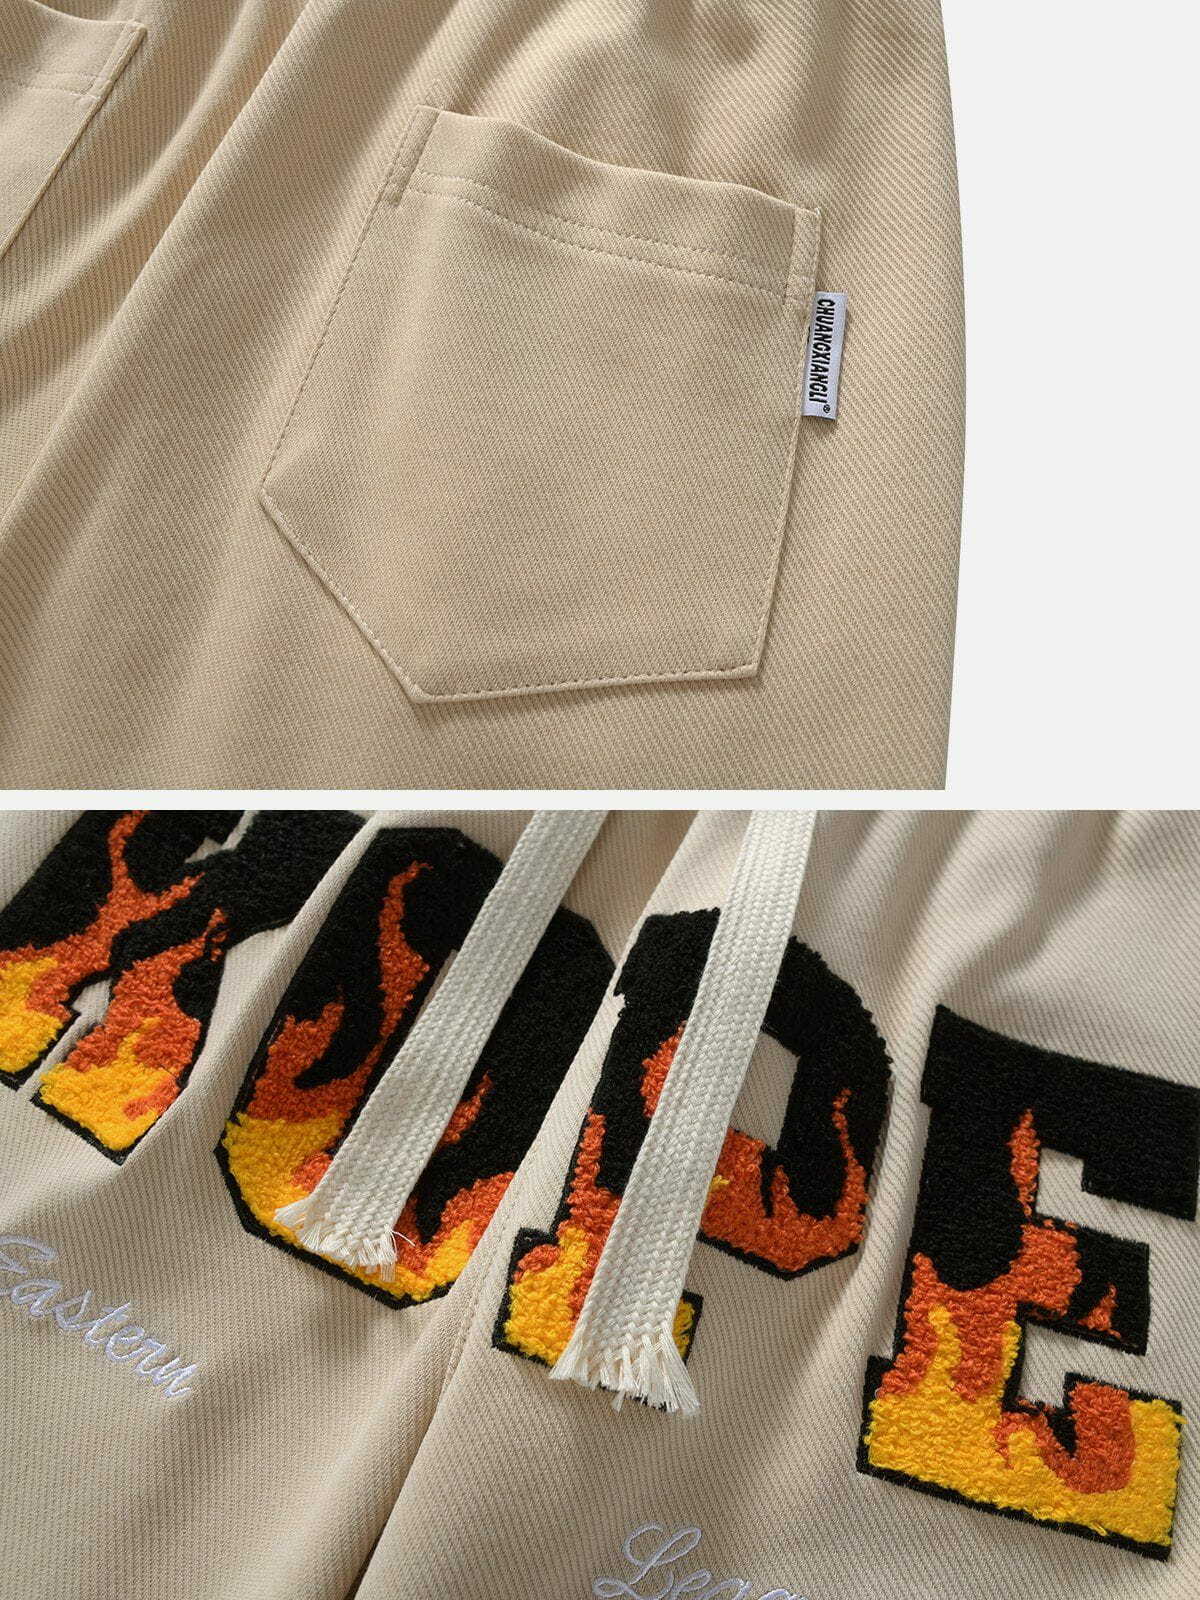 flaming letters sweatpants edgy & vibrant streetwear 4965